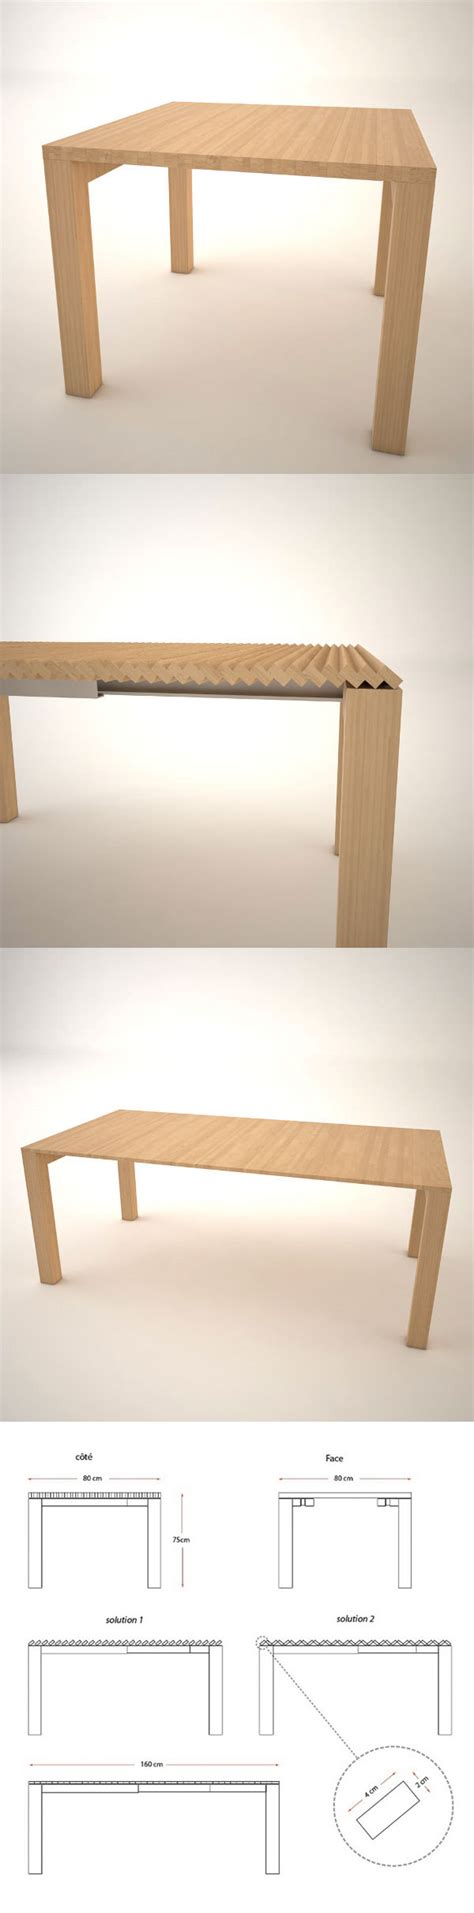 extendable dining tables